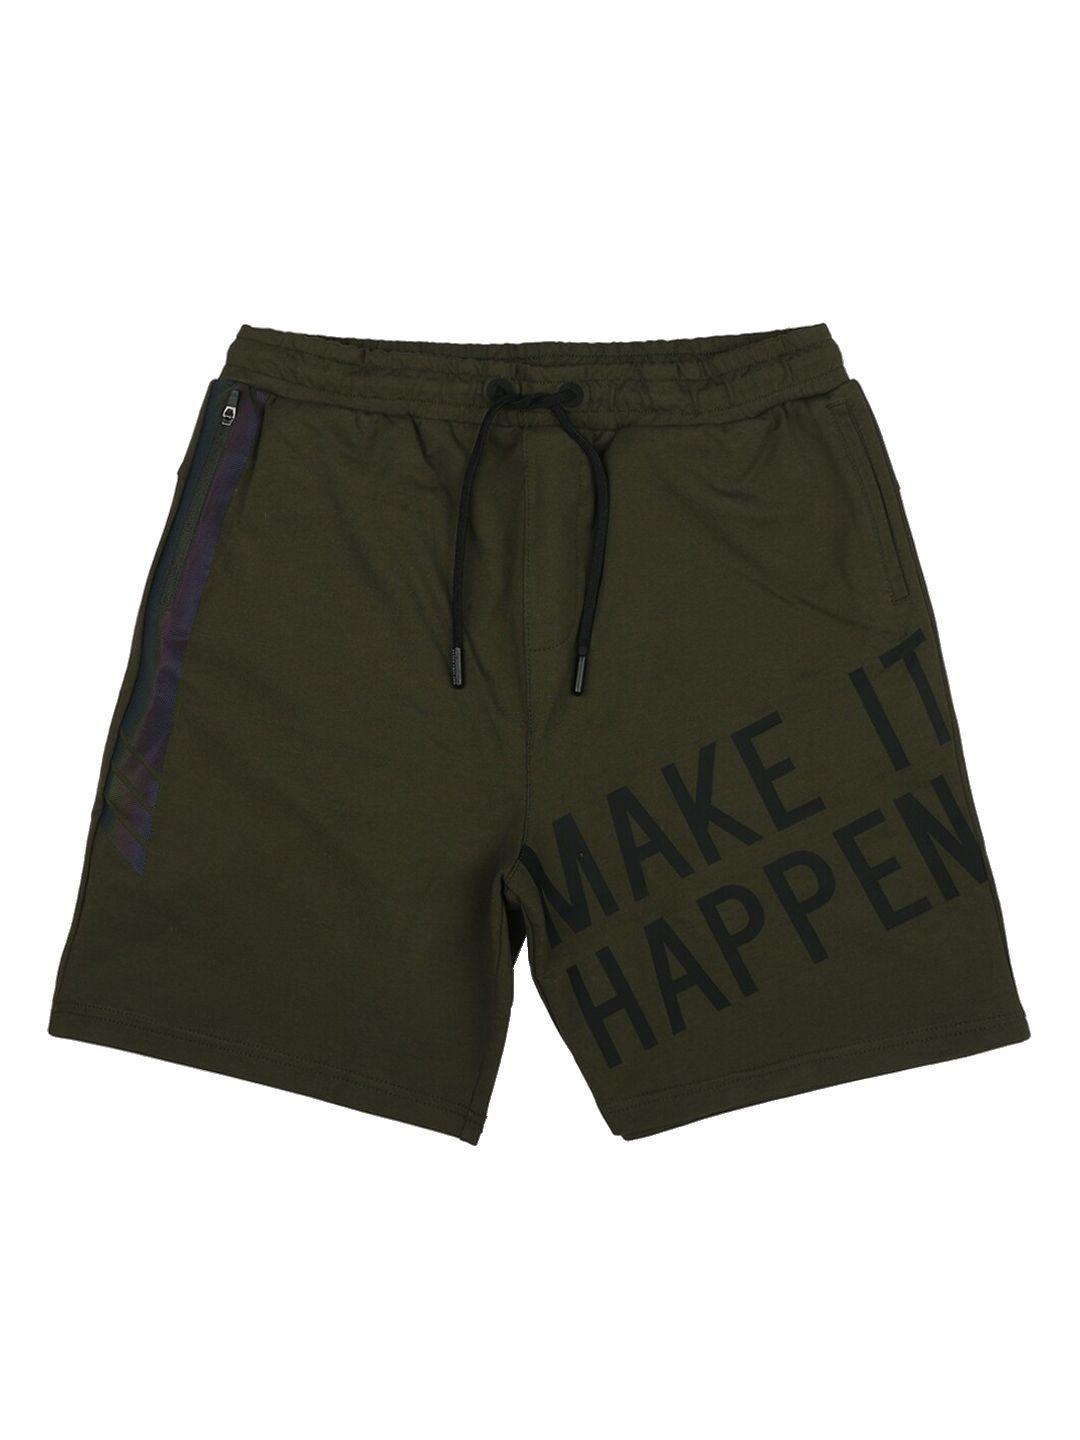 peter-england-boys-olive-green-typography-printed-cotton-shorts